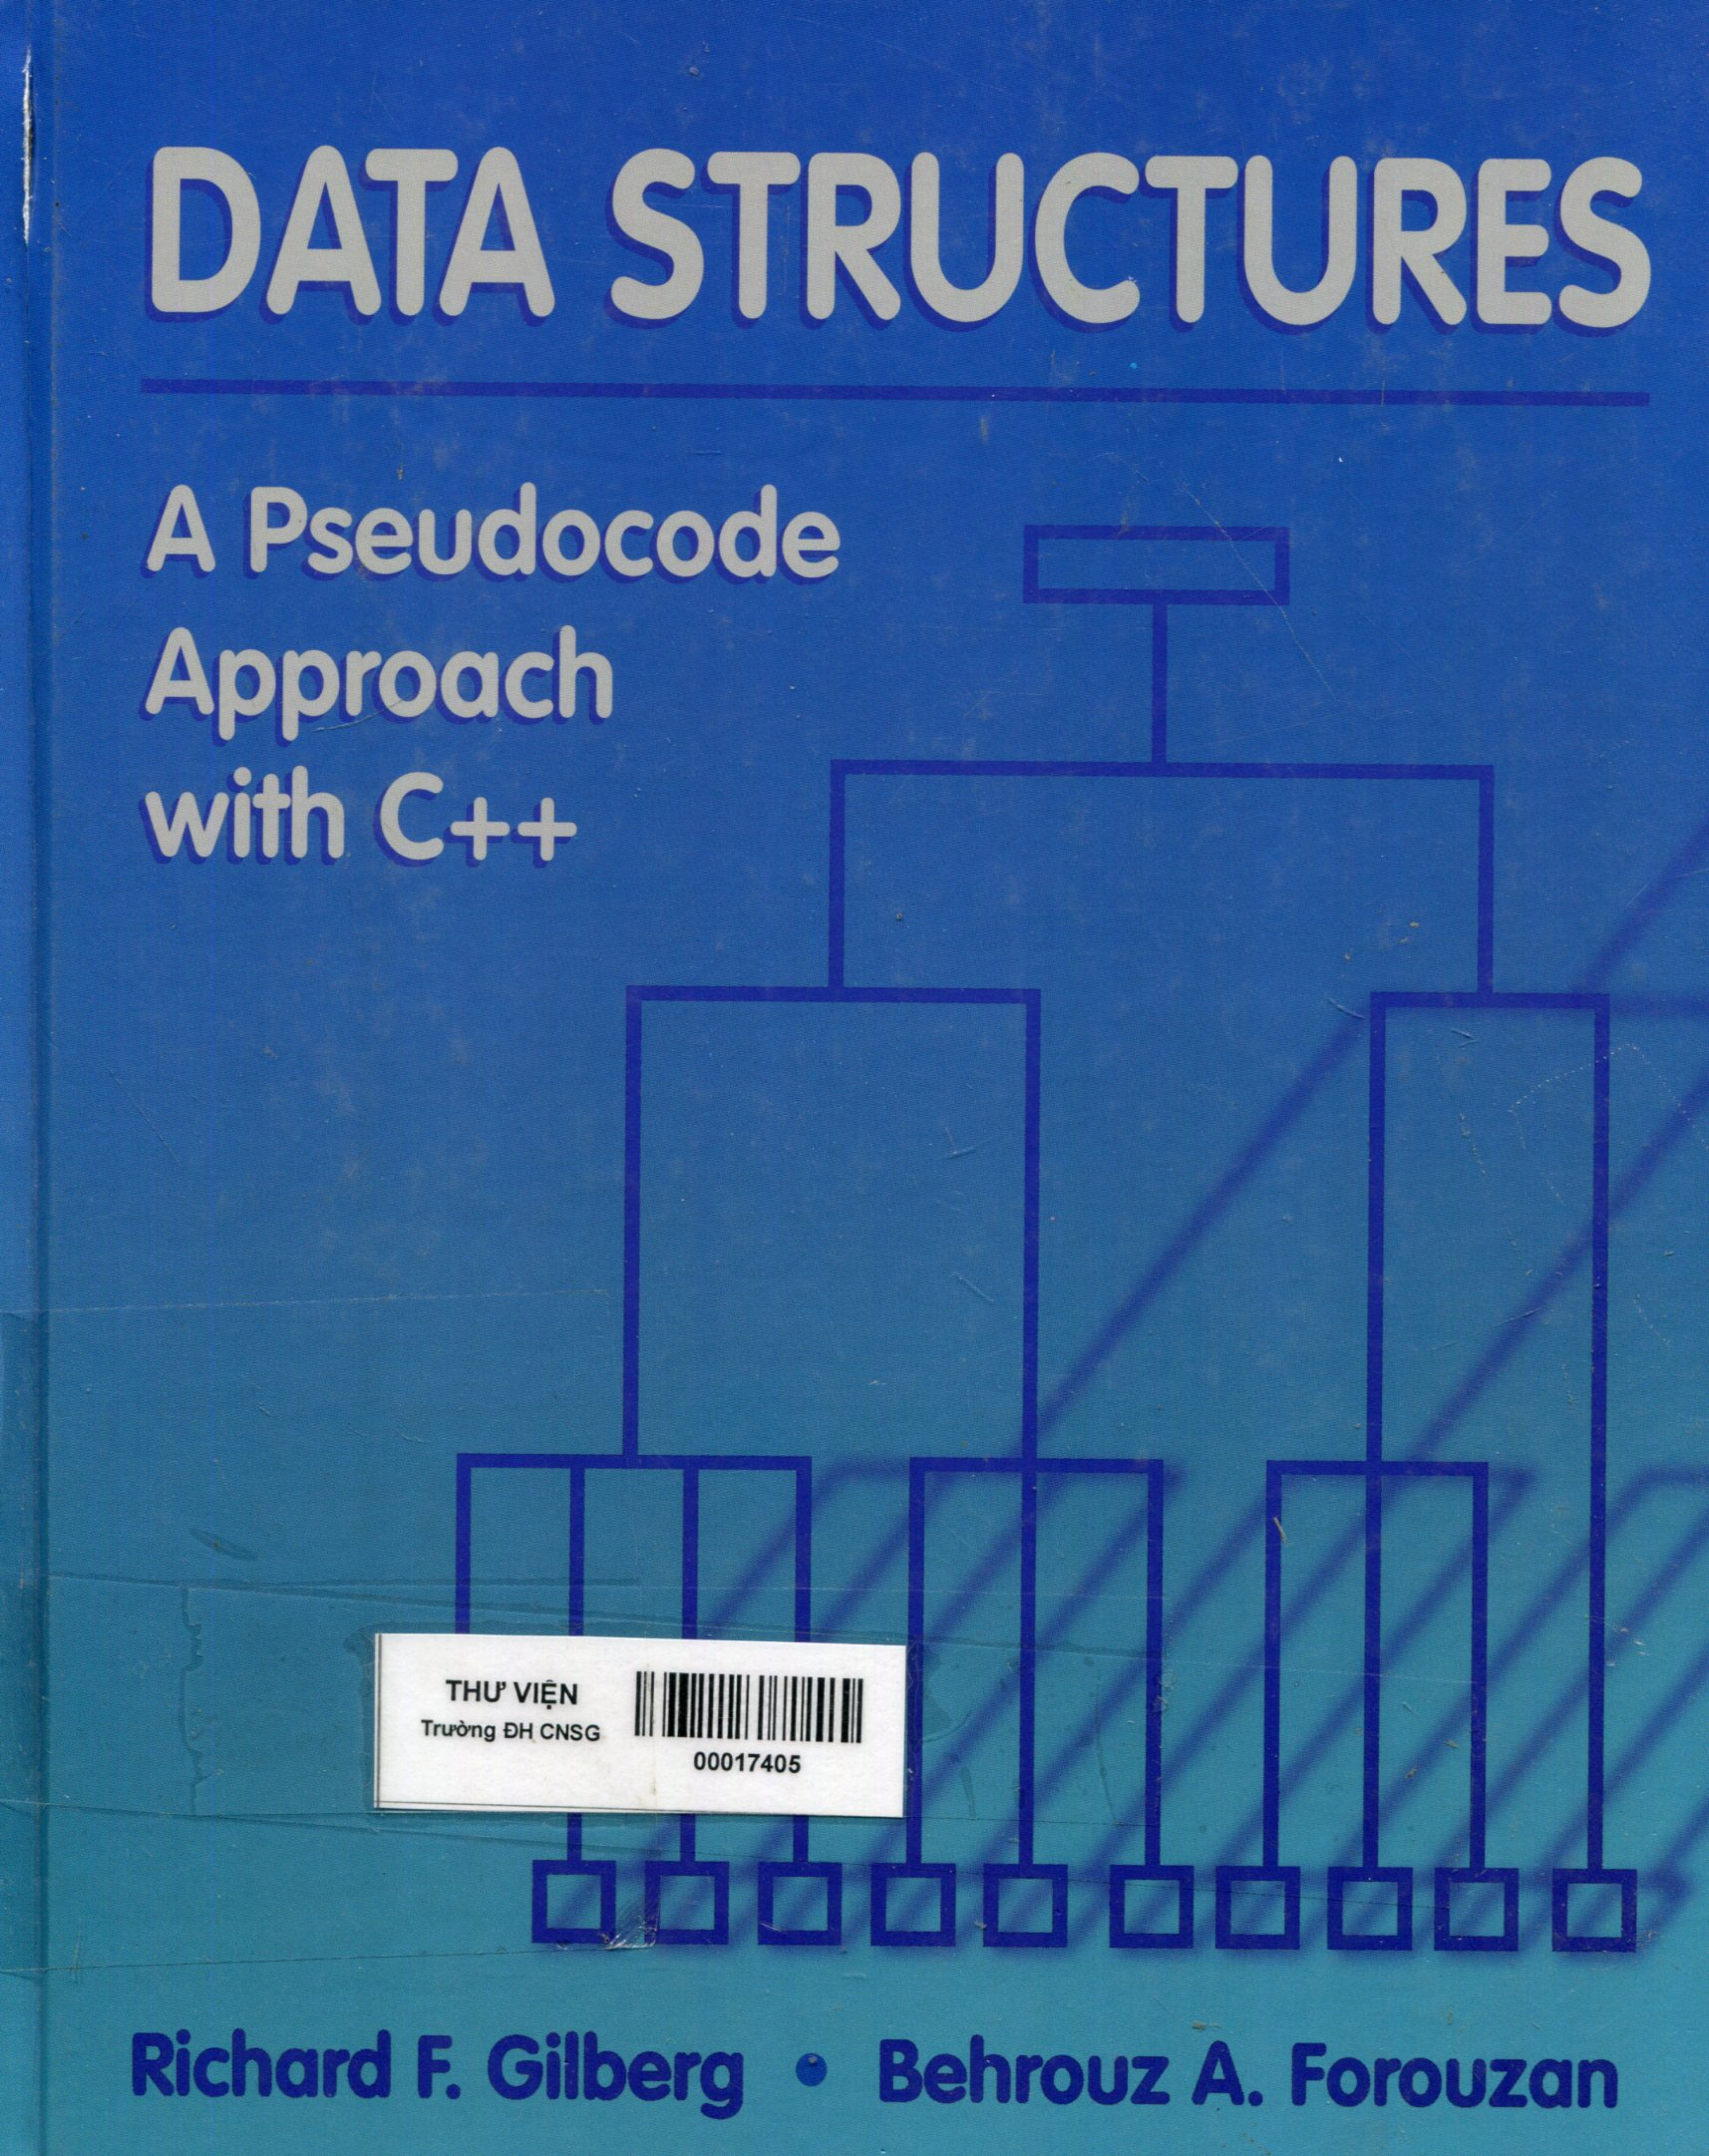 Data structures : a pseudocode approach with C++